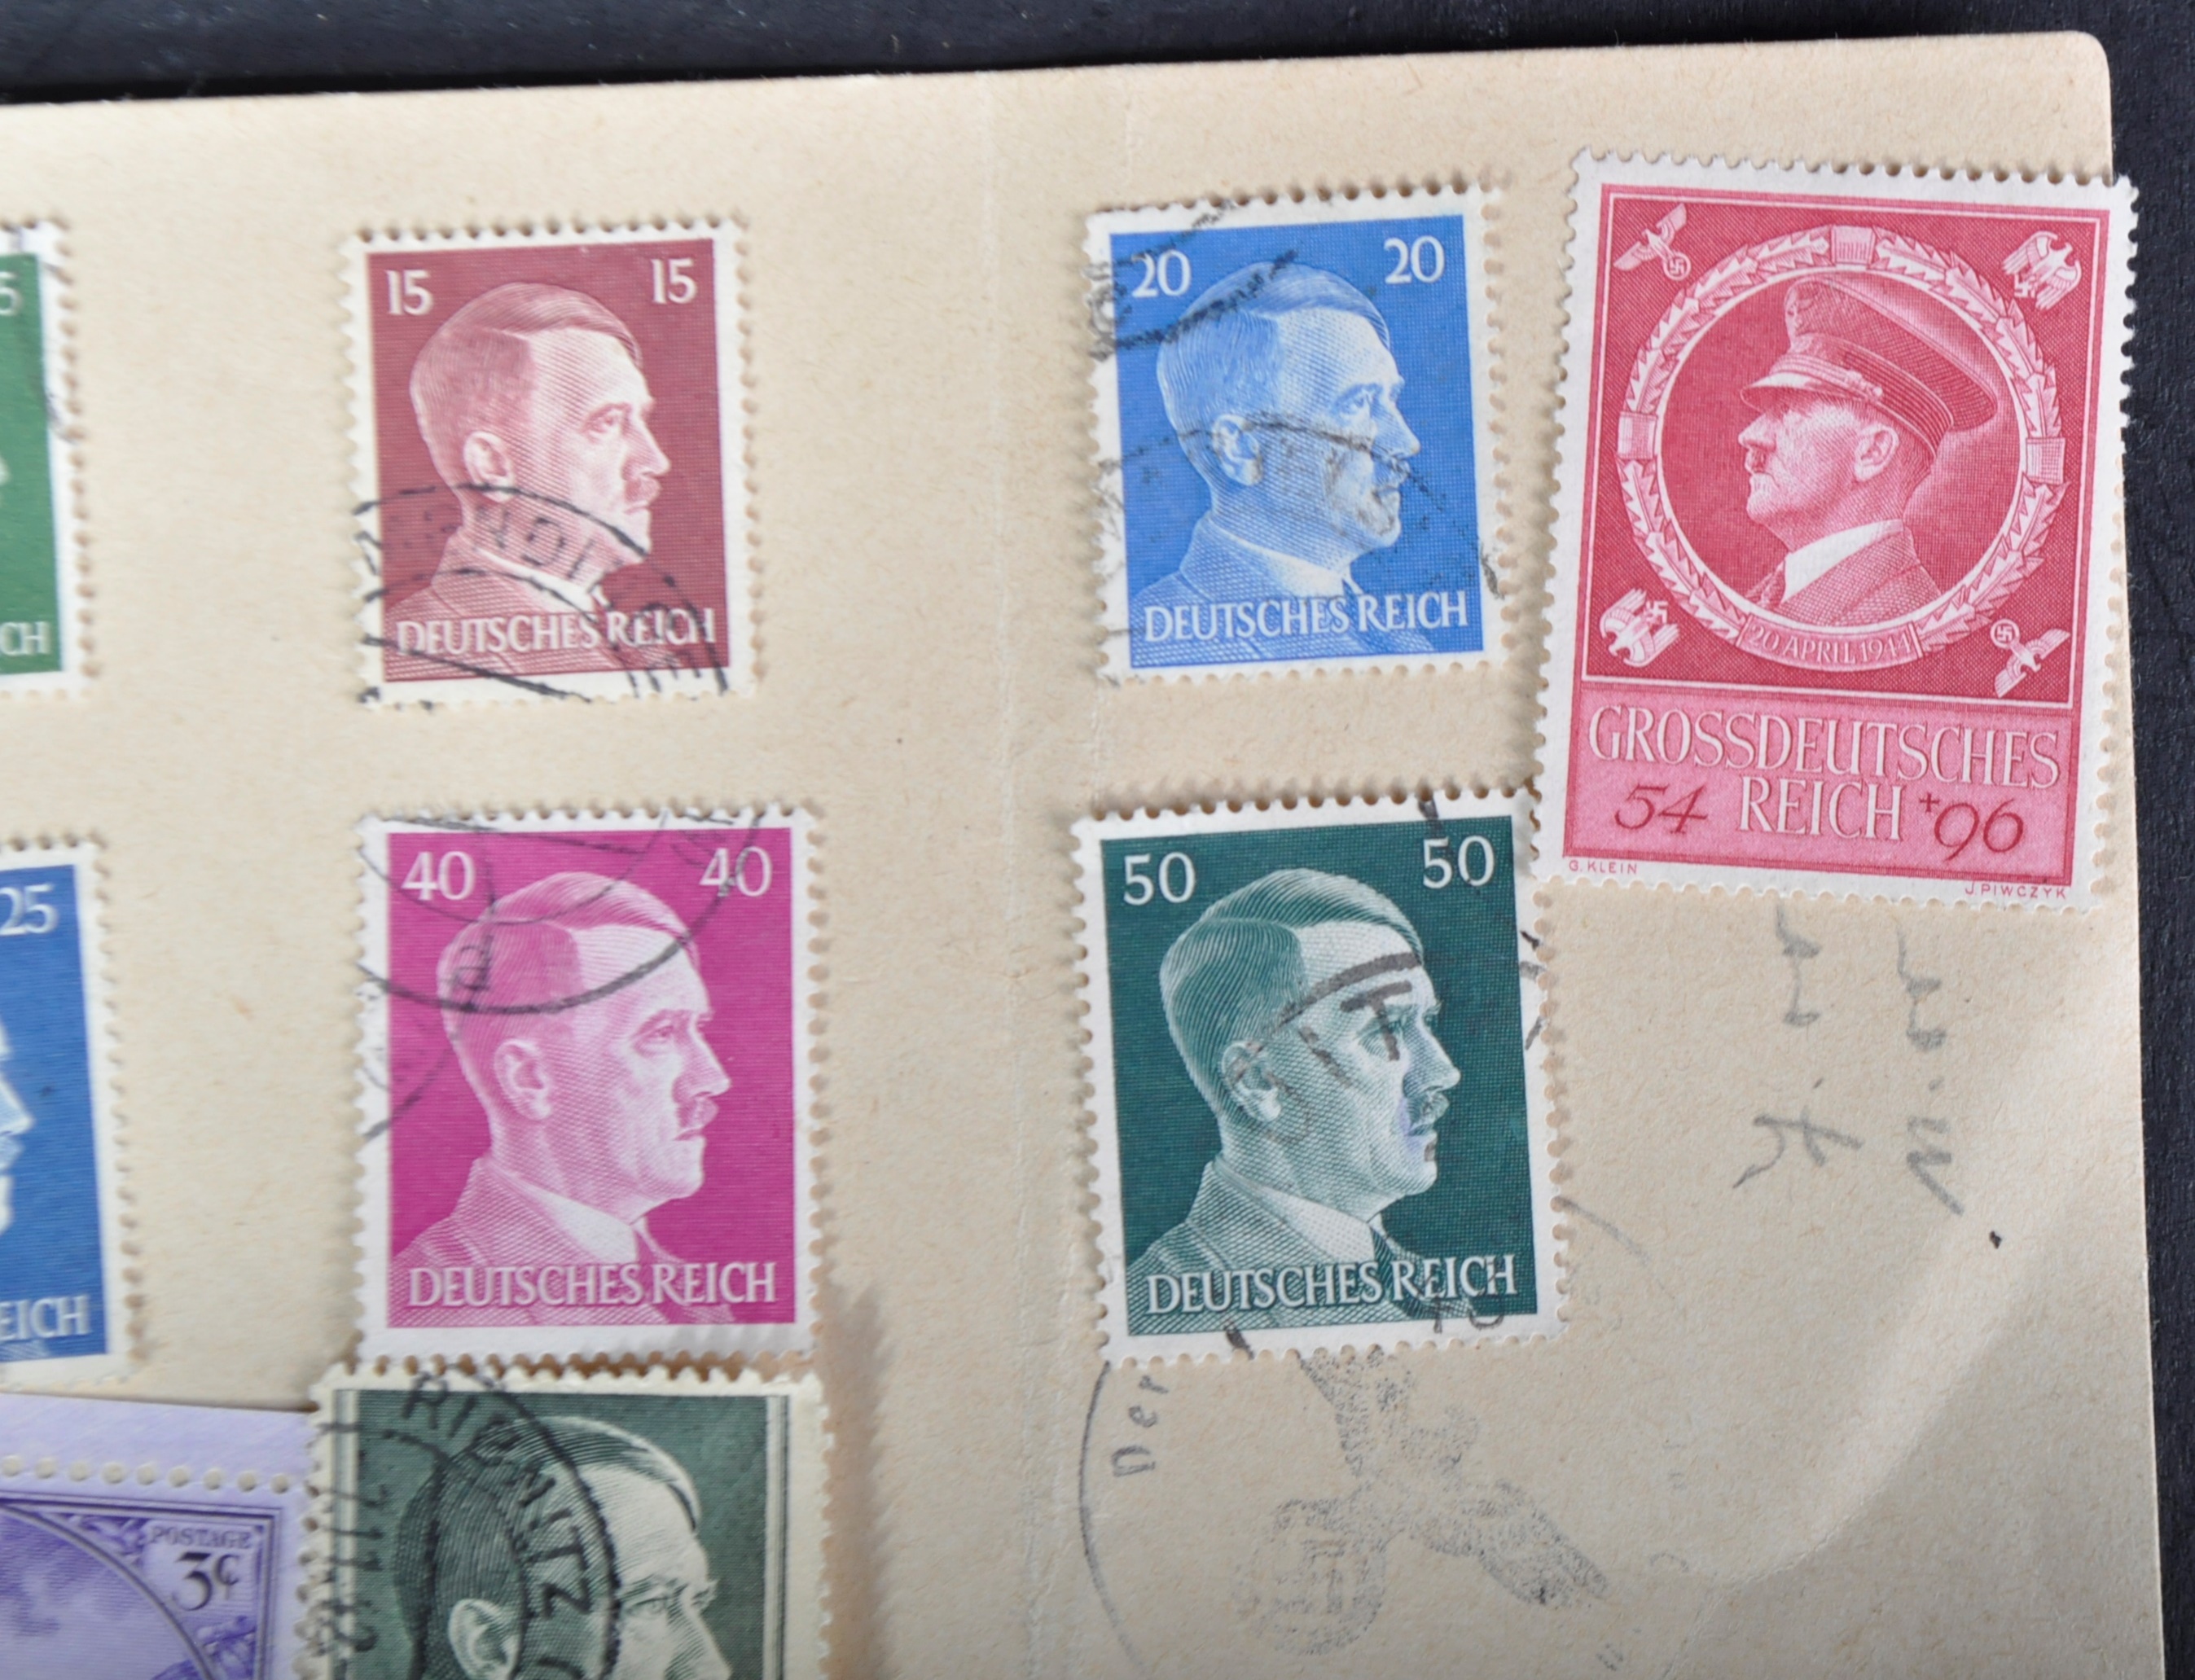 COLLECTION OF PRE-WWII ADOLF HITLER THIRD REICH STAMPS - Image 3 of 3